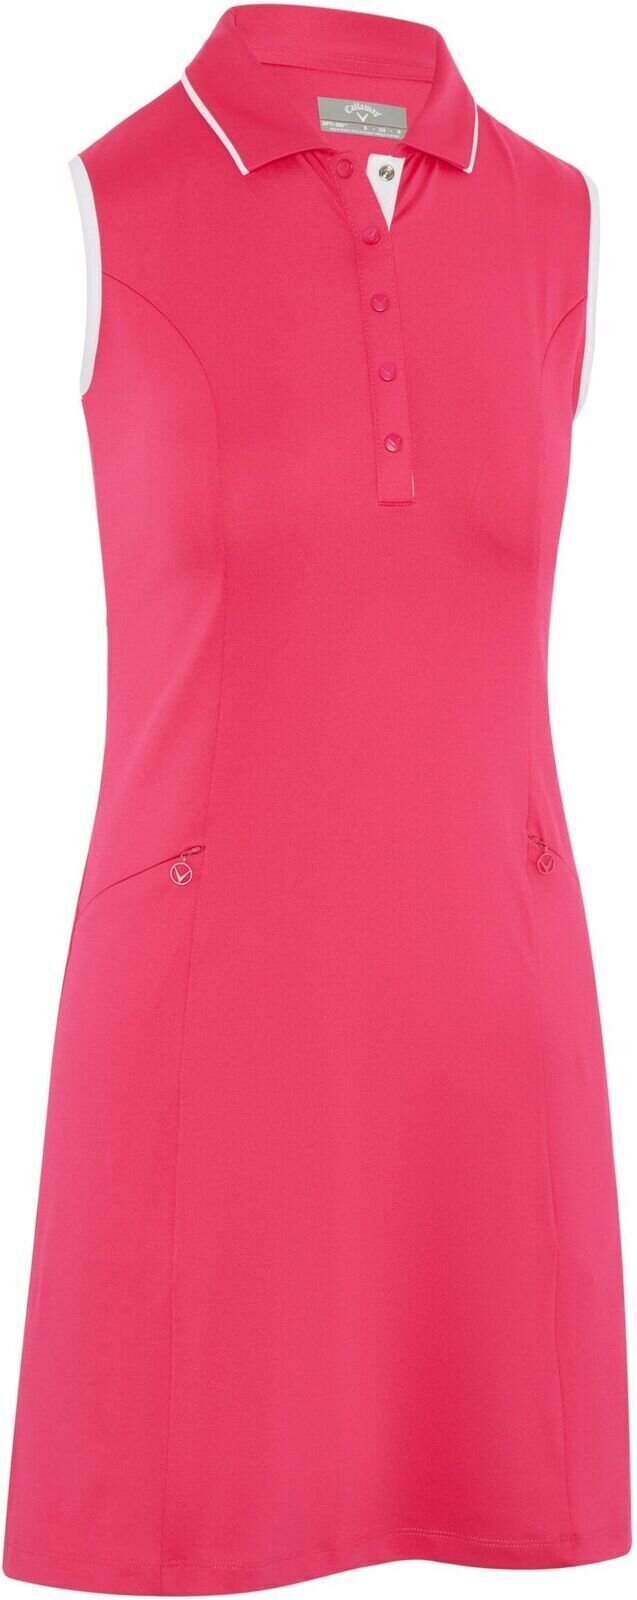 Callaway Womens Sleeveless Dress With Snap Placket Pink Peacock S